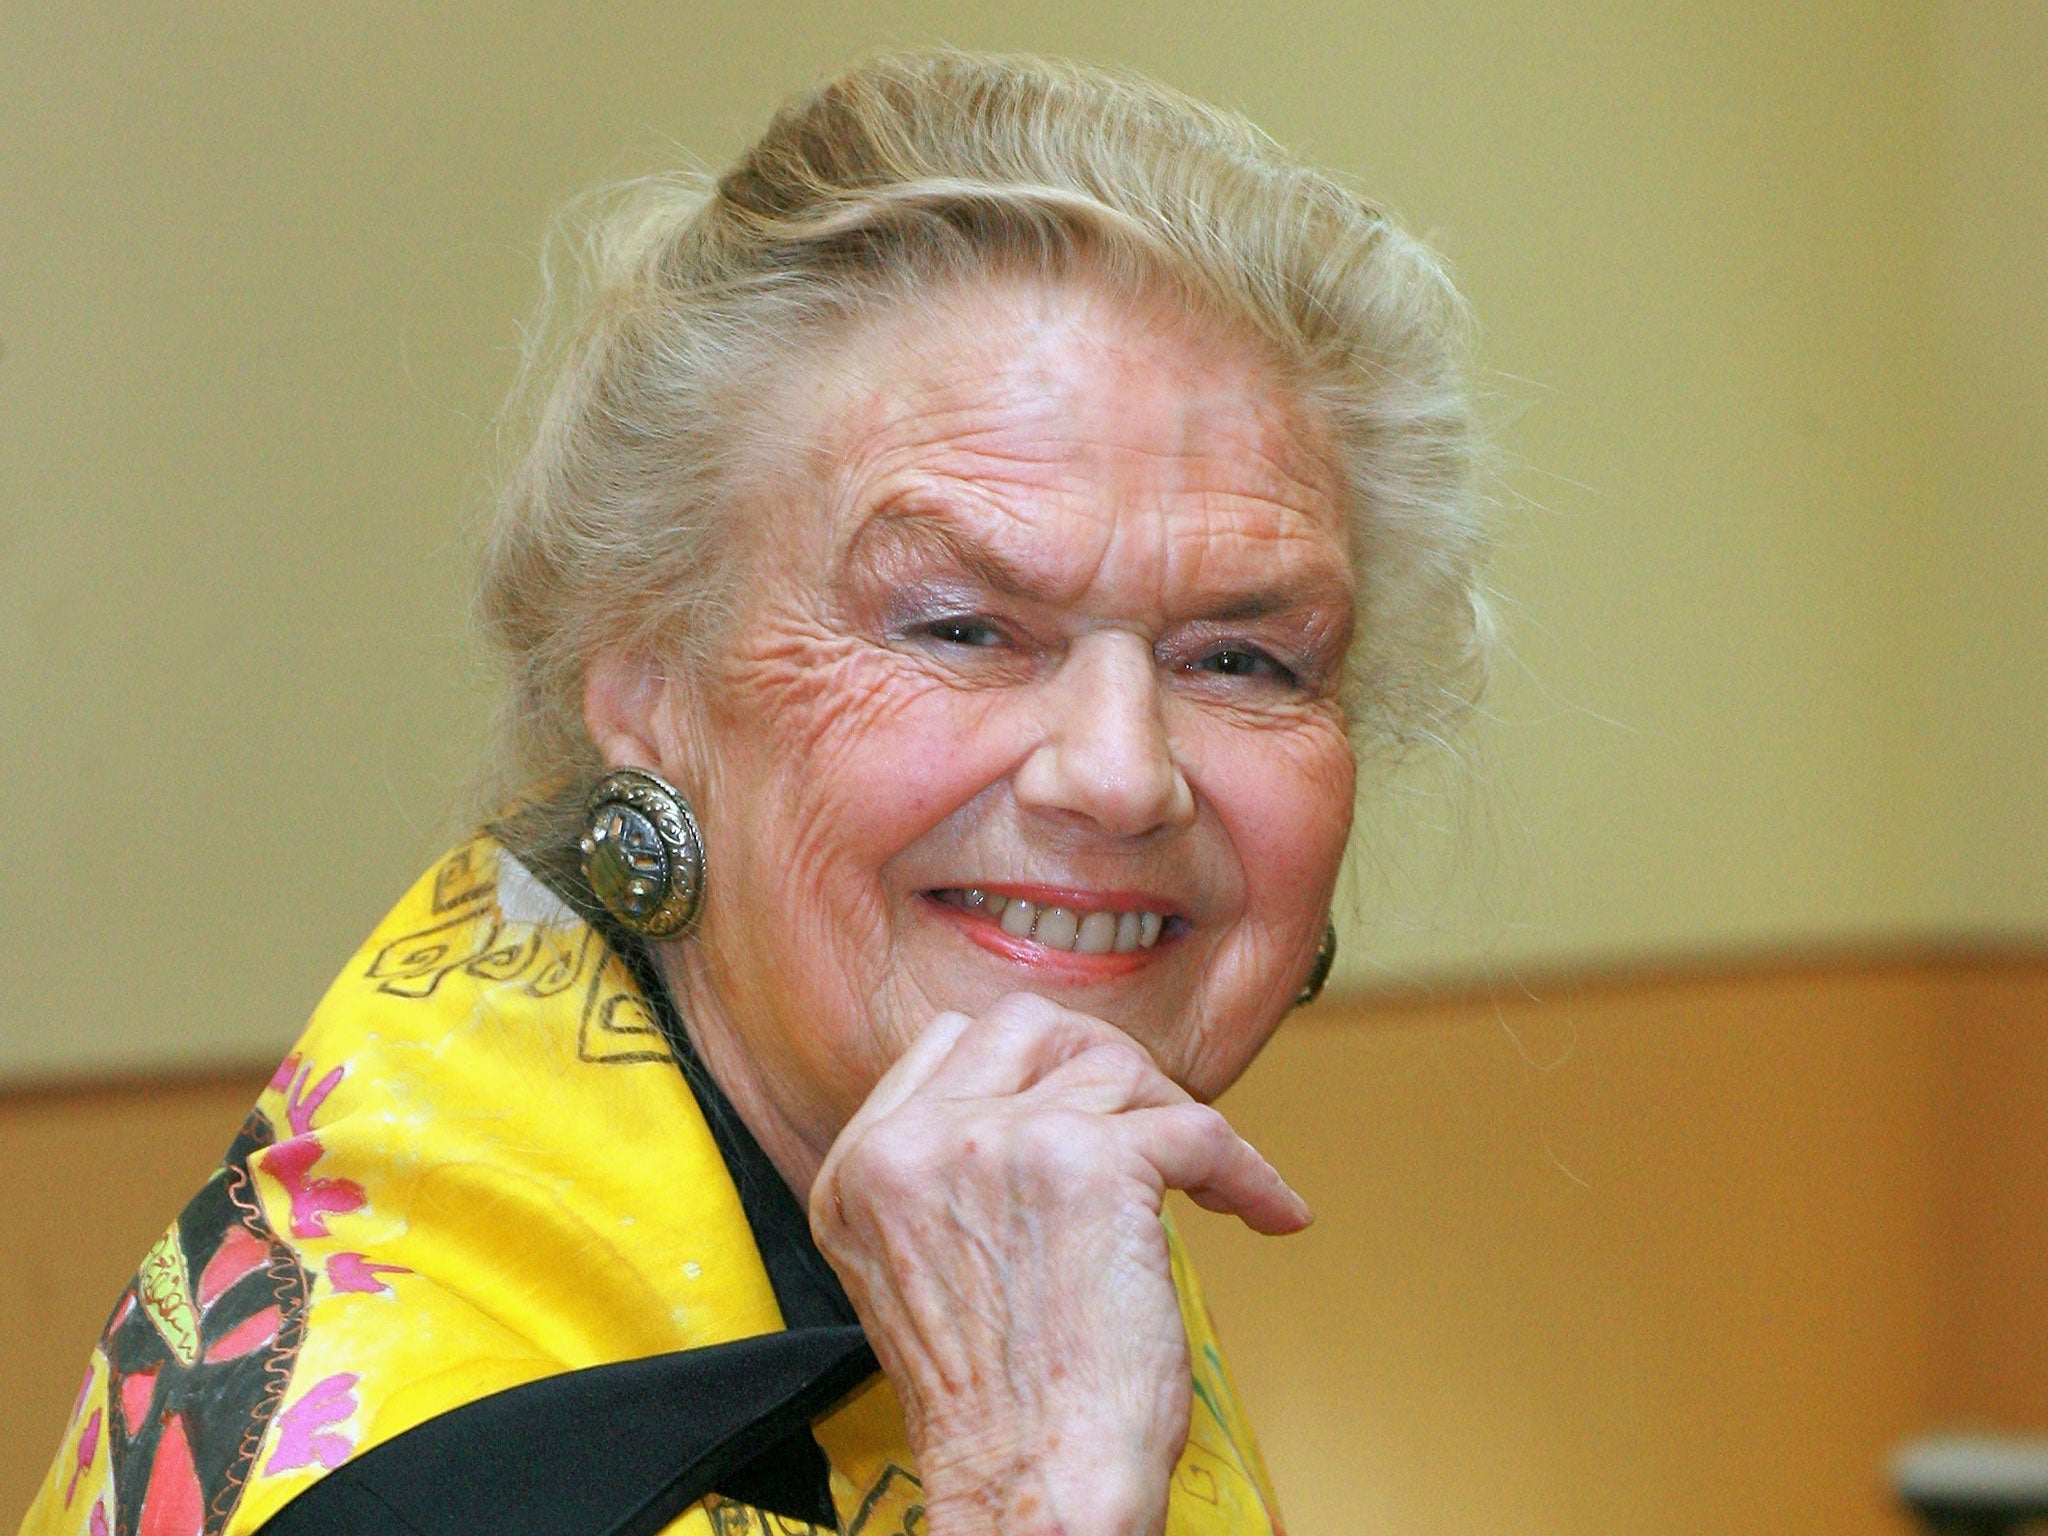 Sheila Kitzinger attends a benefit screening of the documentary ‘The Business of Being Born’ in Sydney in 2007